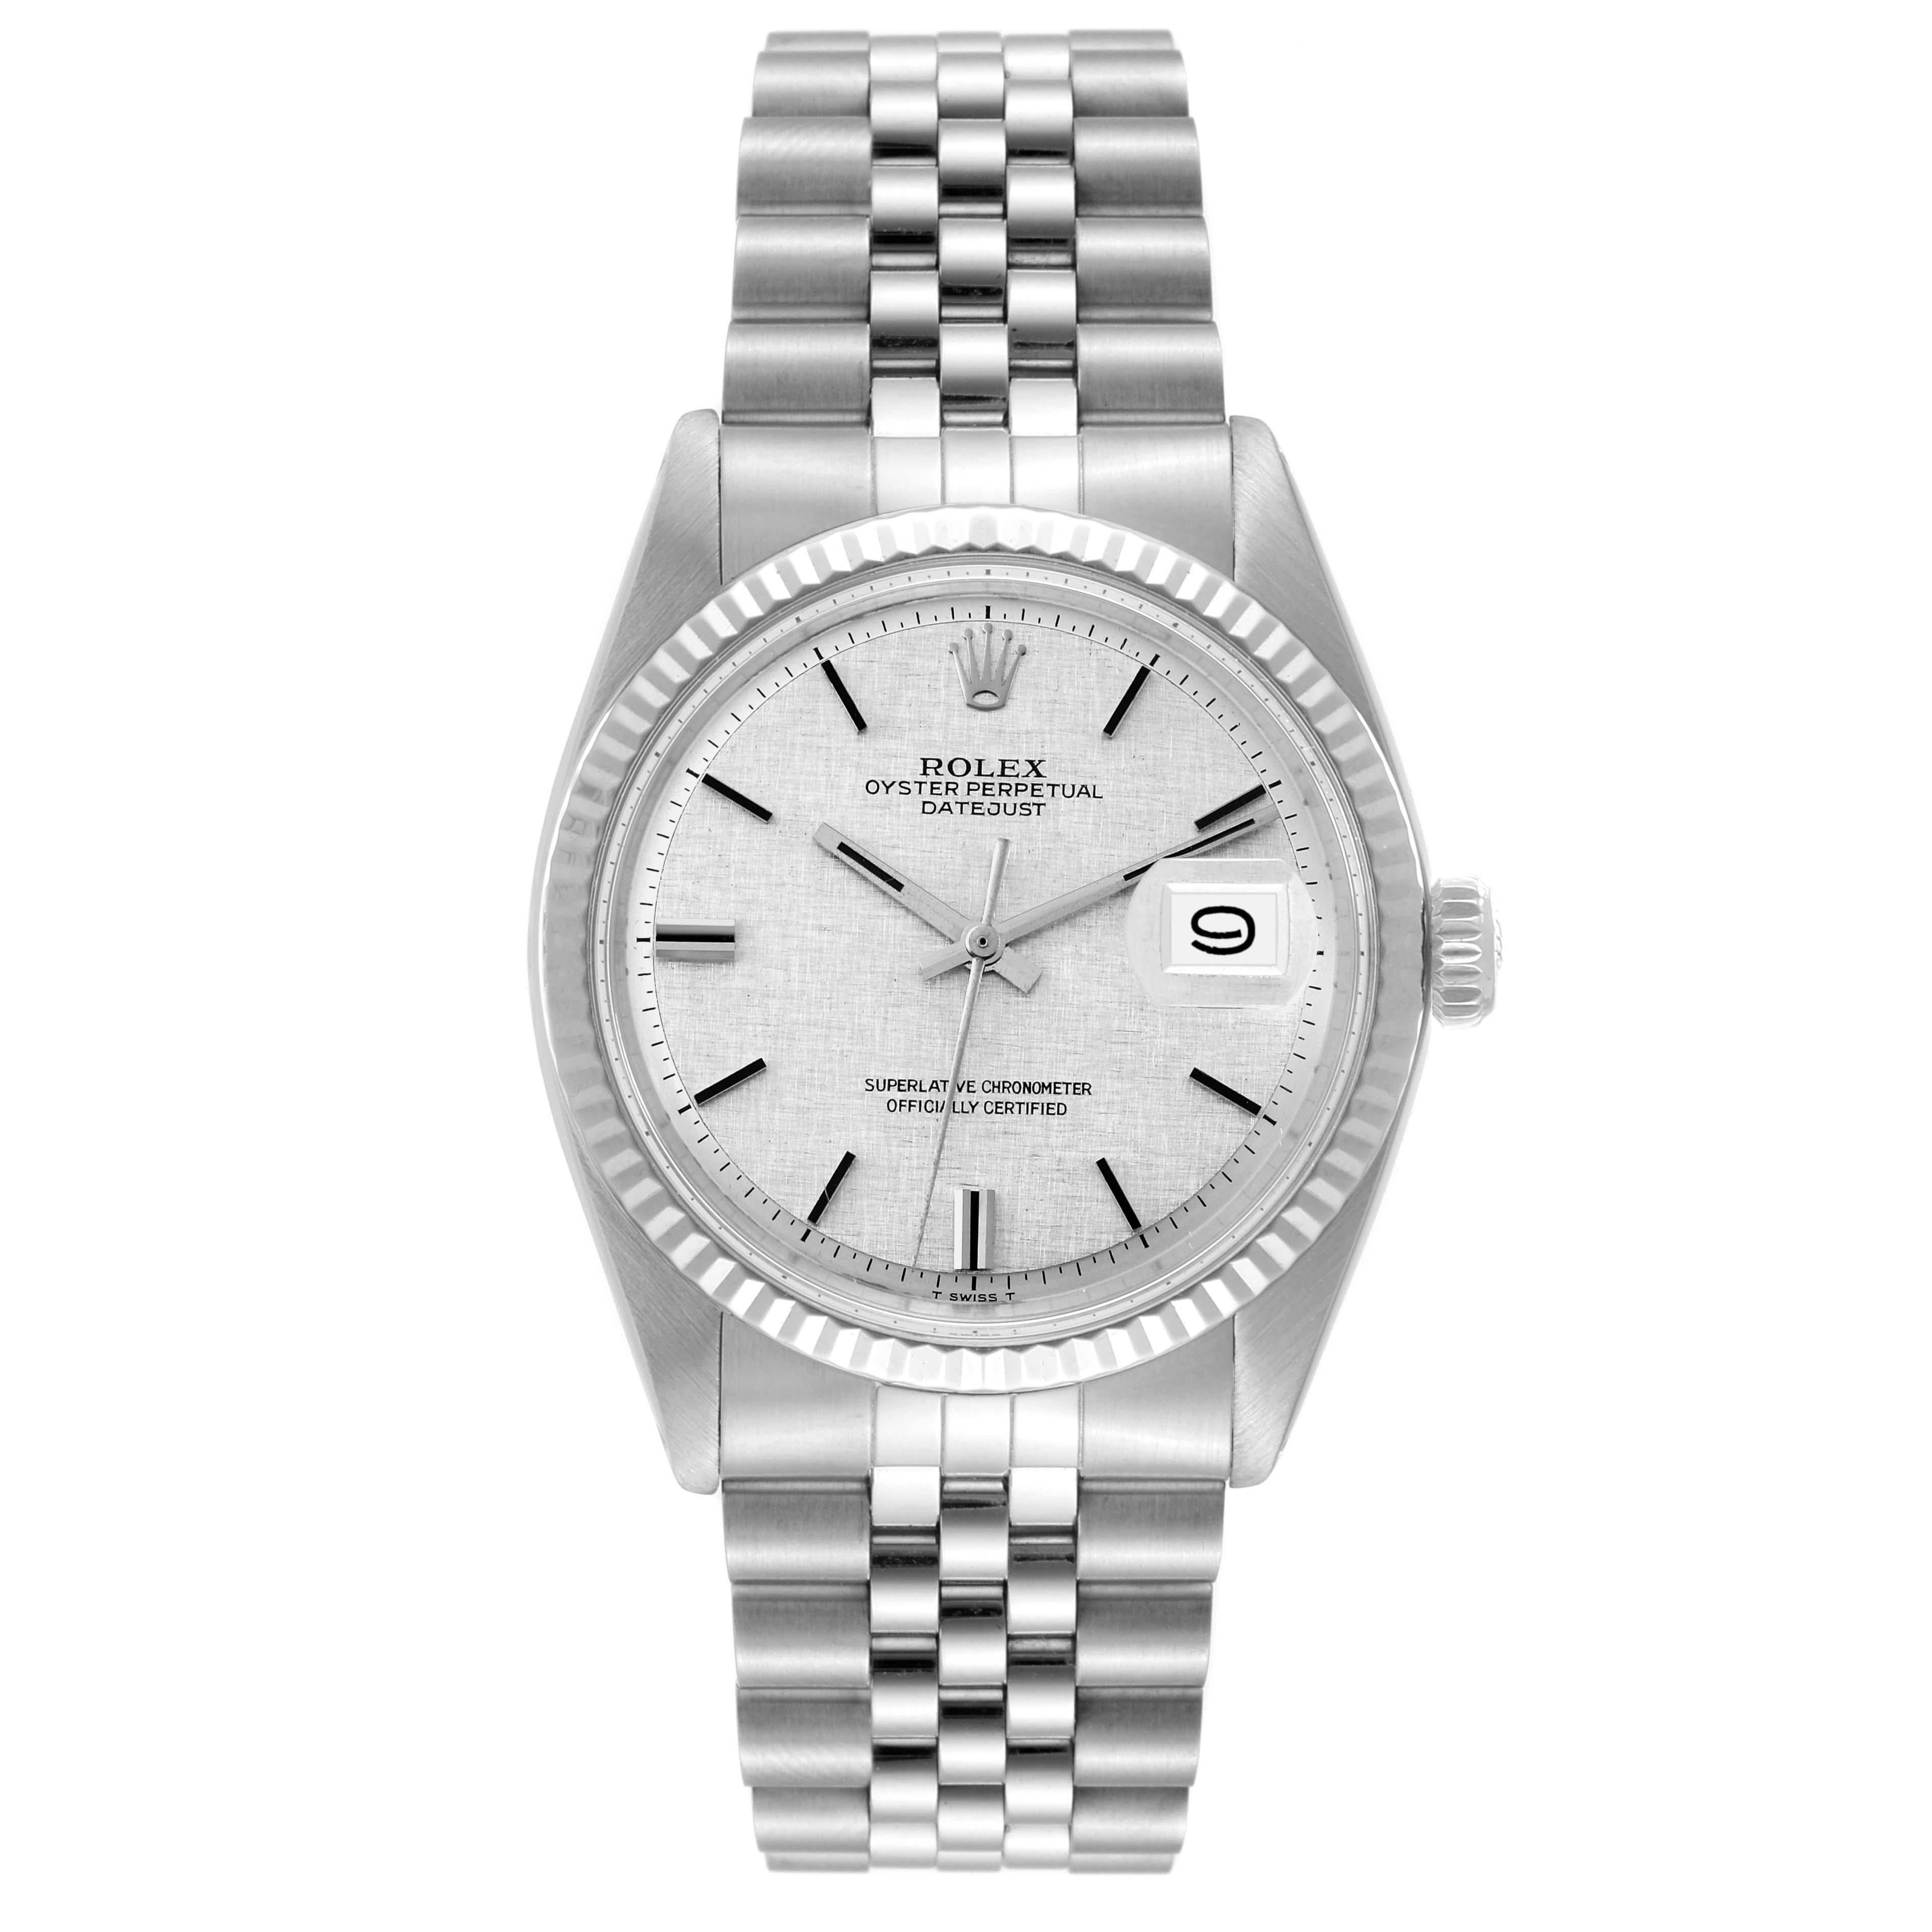 Rolex Datejust Steel White Gold Silver Linen Dial Vintage Mens Watch 1601. Officially certified chronometer automatic self-winding movement. Stainless steel oyster case 36 mm in diameter. Rolex logo on the crown. 18k white gold fluted bezel. Acrylic